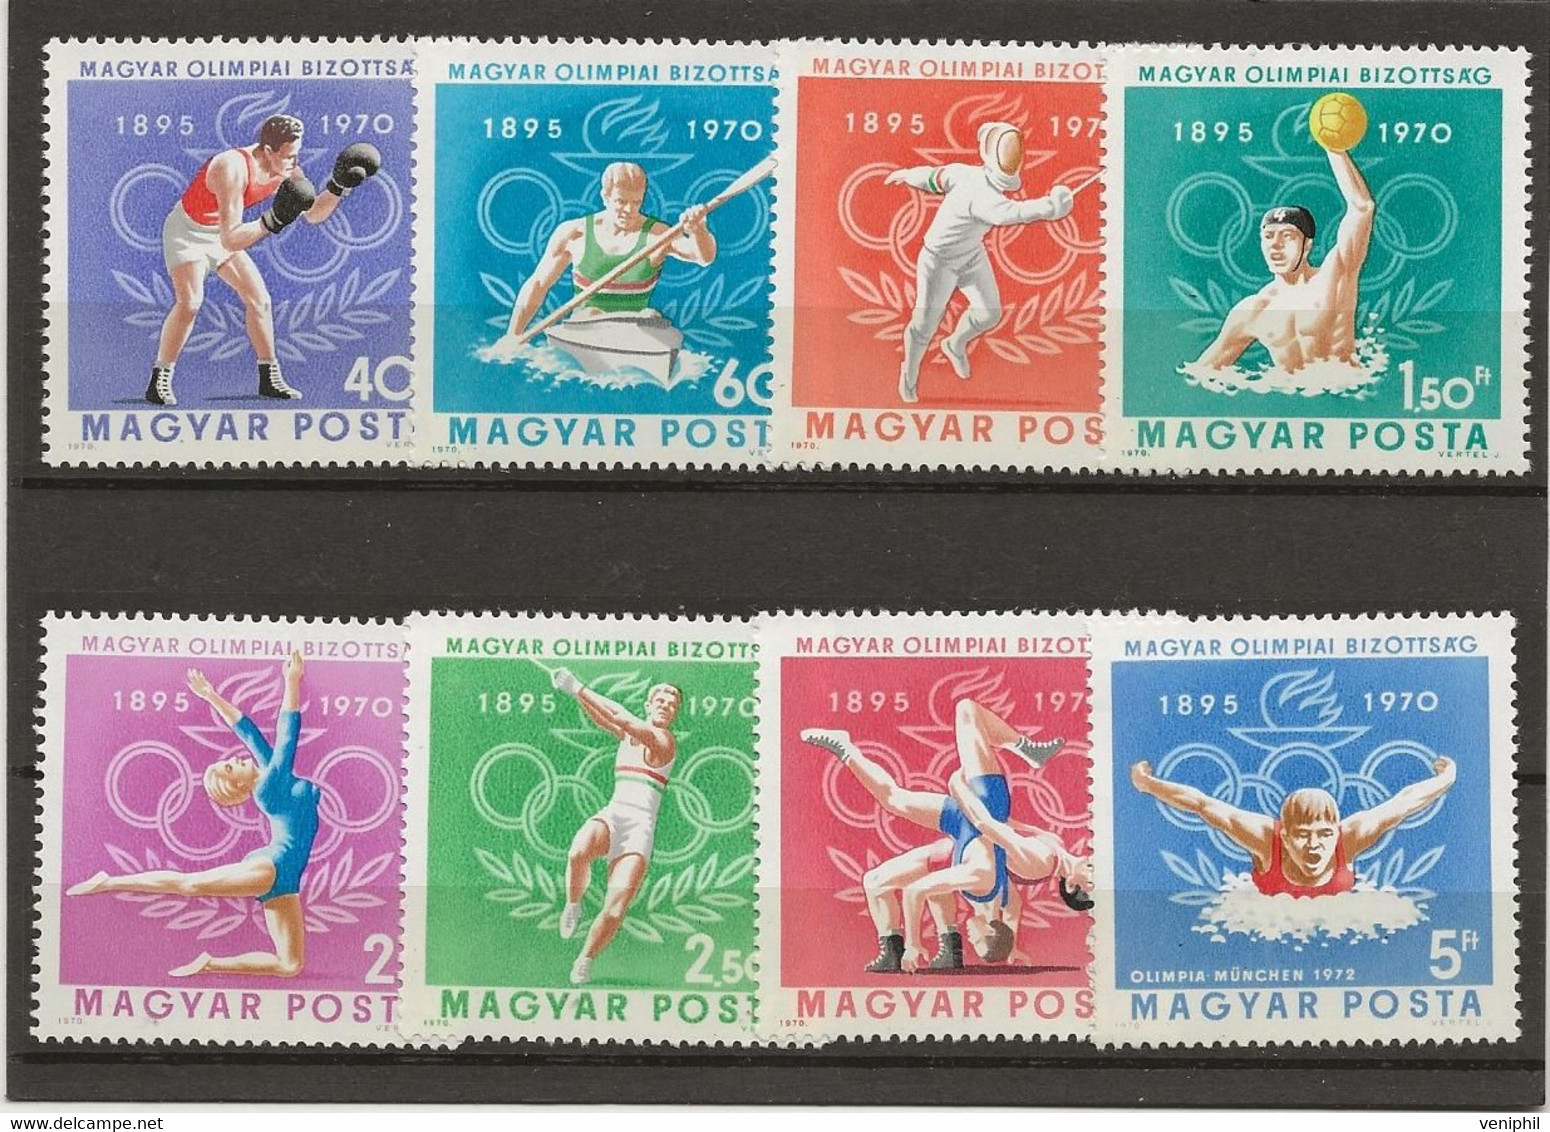 HONGRIE - SERIE SPORTS OLYMPIQUES  N° 2120 A 2127- NEUF INFIME CHARNIERE - ANNEE 1970 - Nuovi